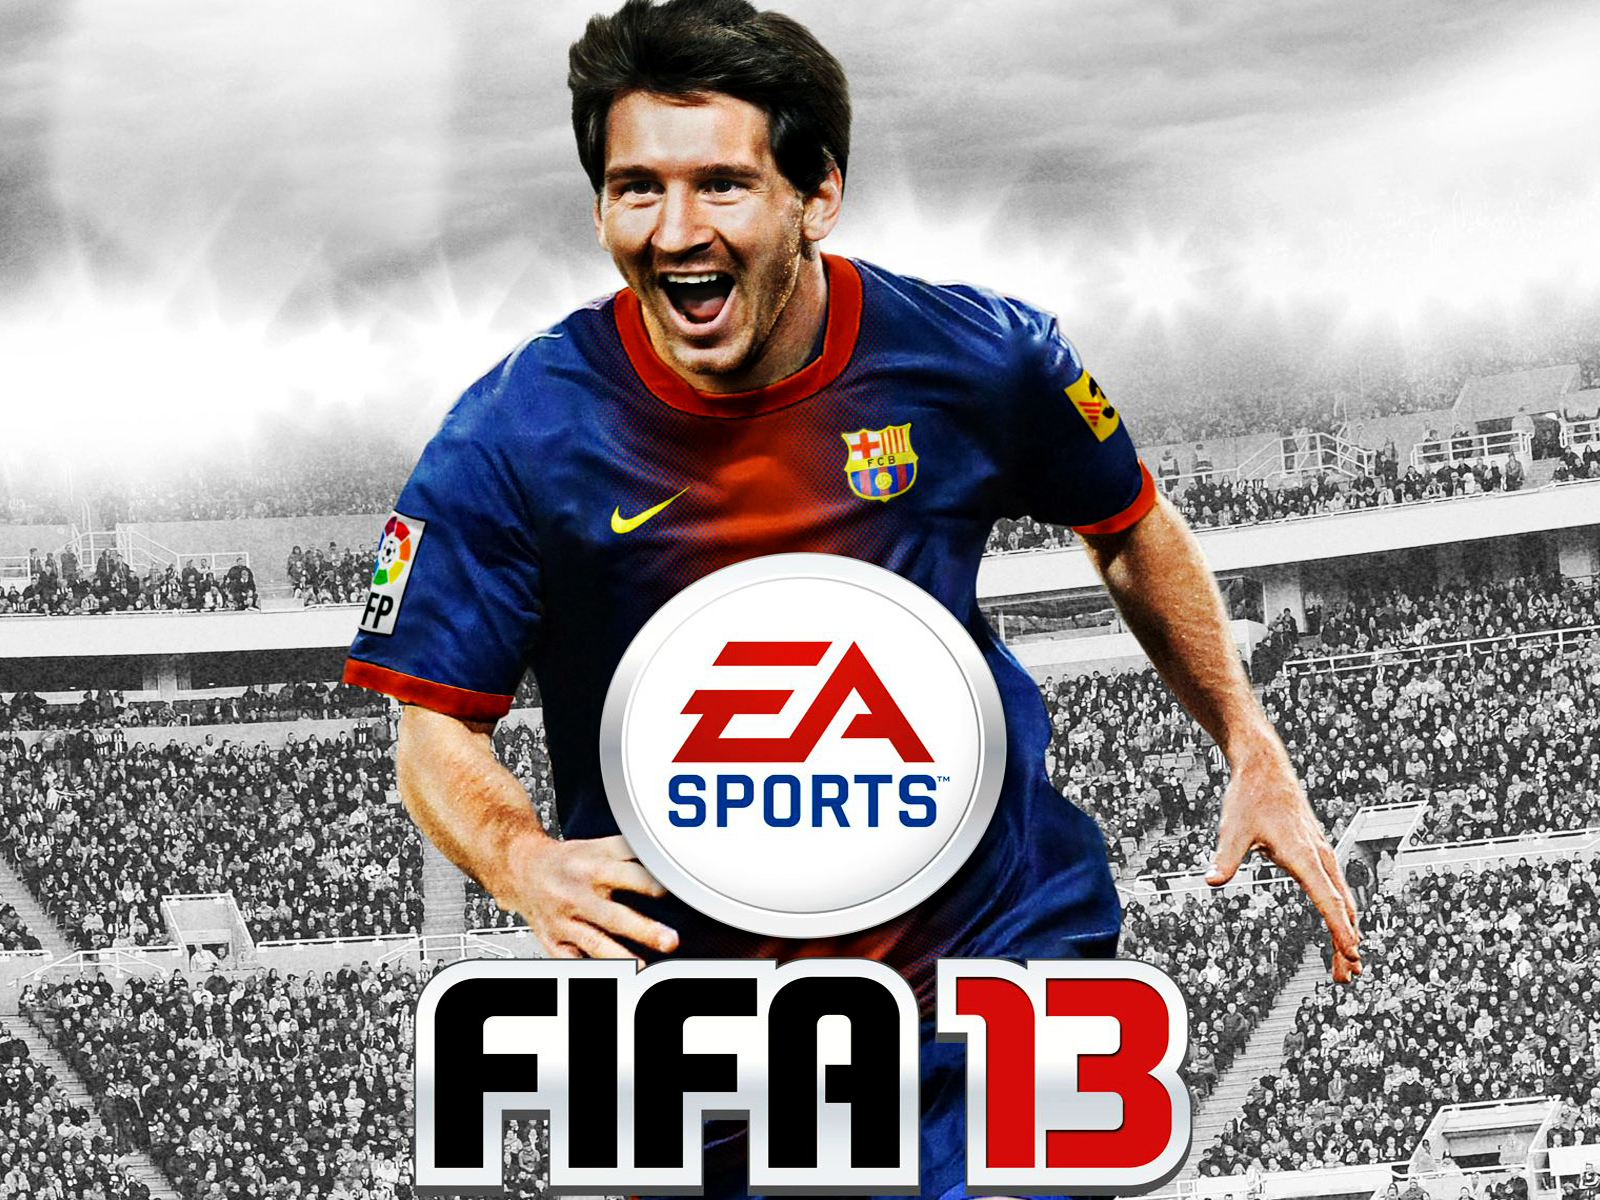 Fifa Messi HD Wallpaper And Cover Video Game Desktop